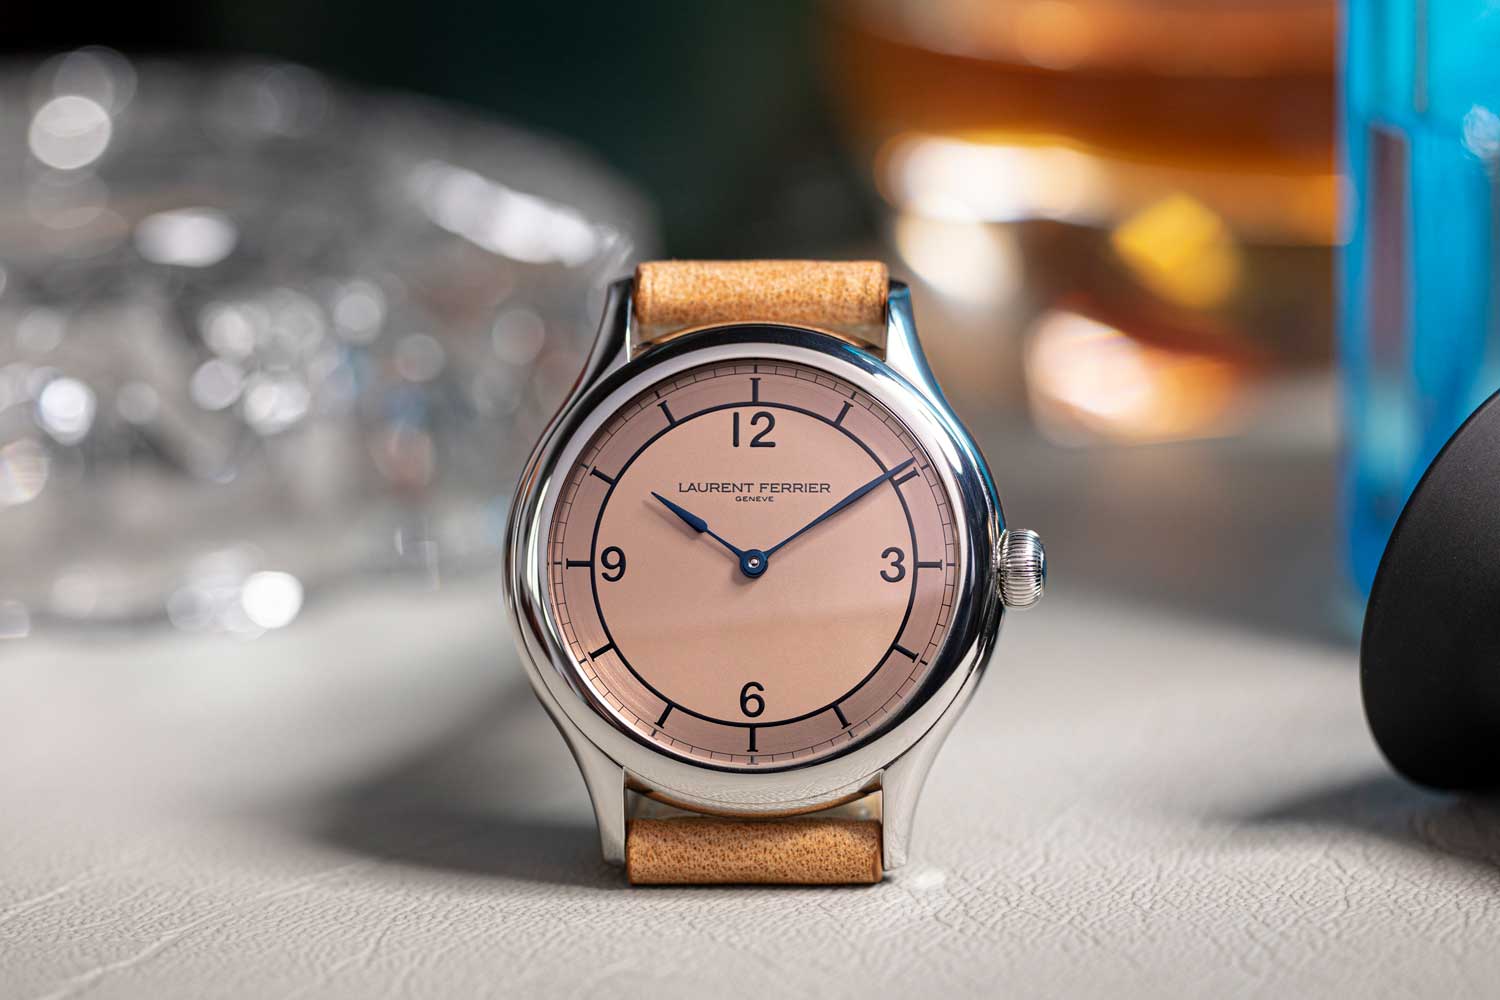 The Laurent Ferrier Steel Galet Micro-Rotor Salmon Dial pièce unique for Revolution, features an Automn (salmon, in Laurent Ferrier Speak and is powered by the self-winding FBN 229.01 micro-rotor movement which has a double direct impulse on the balance, an exclusive double direct-impulse escapement in silicon directly incorporated into the balance (©Revolution)